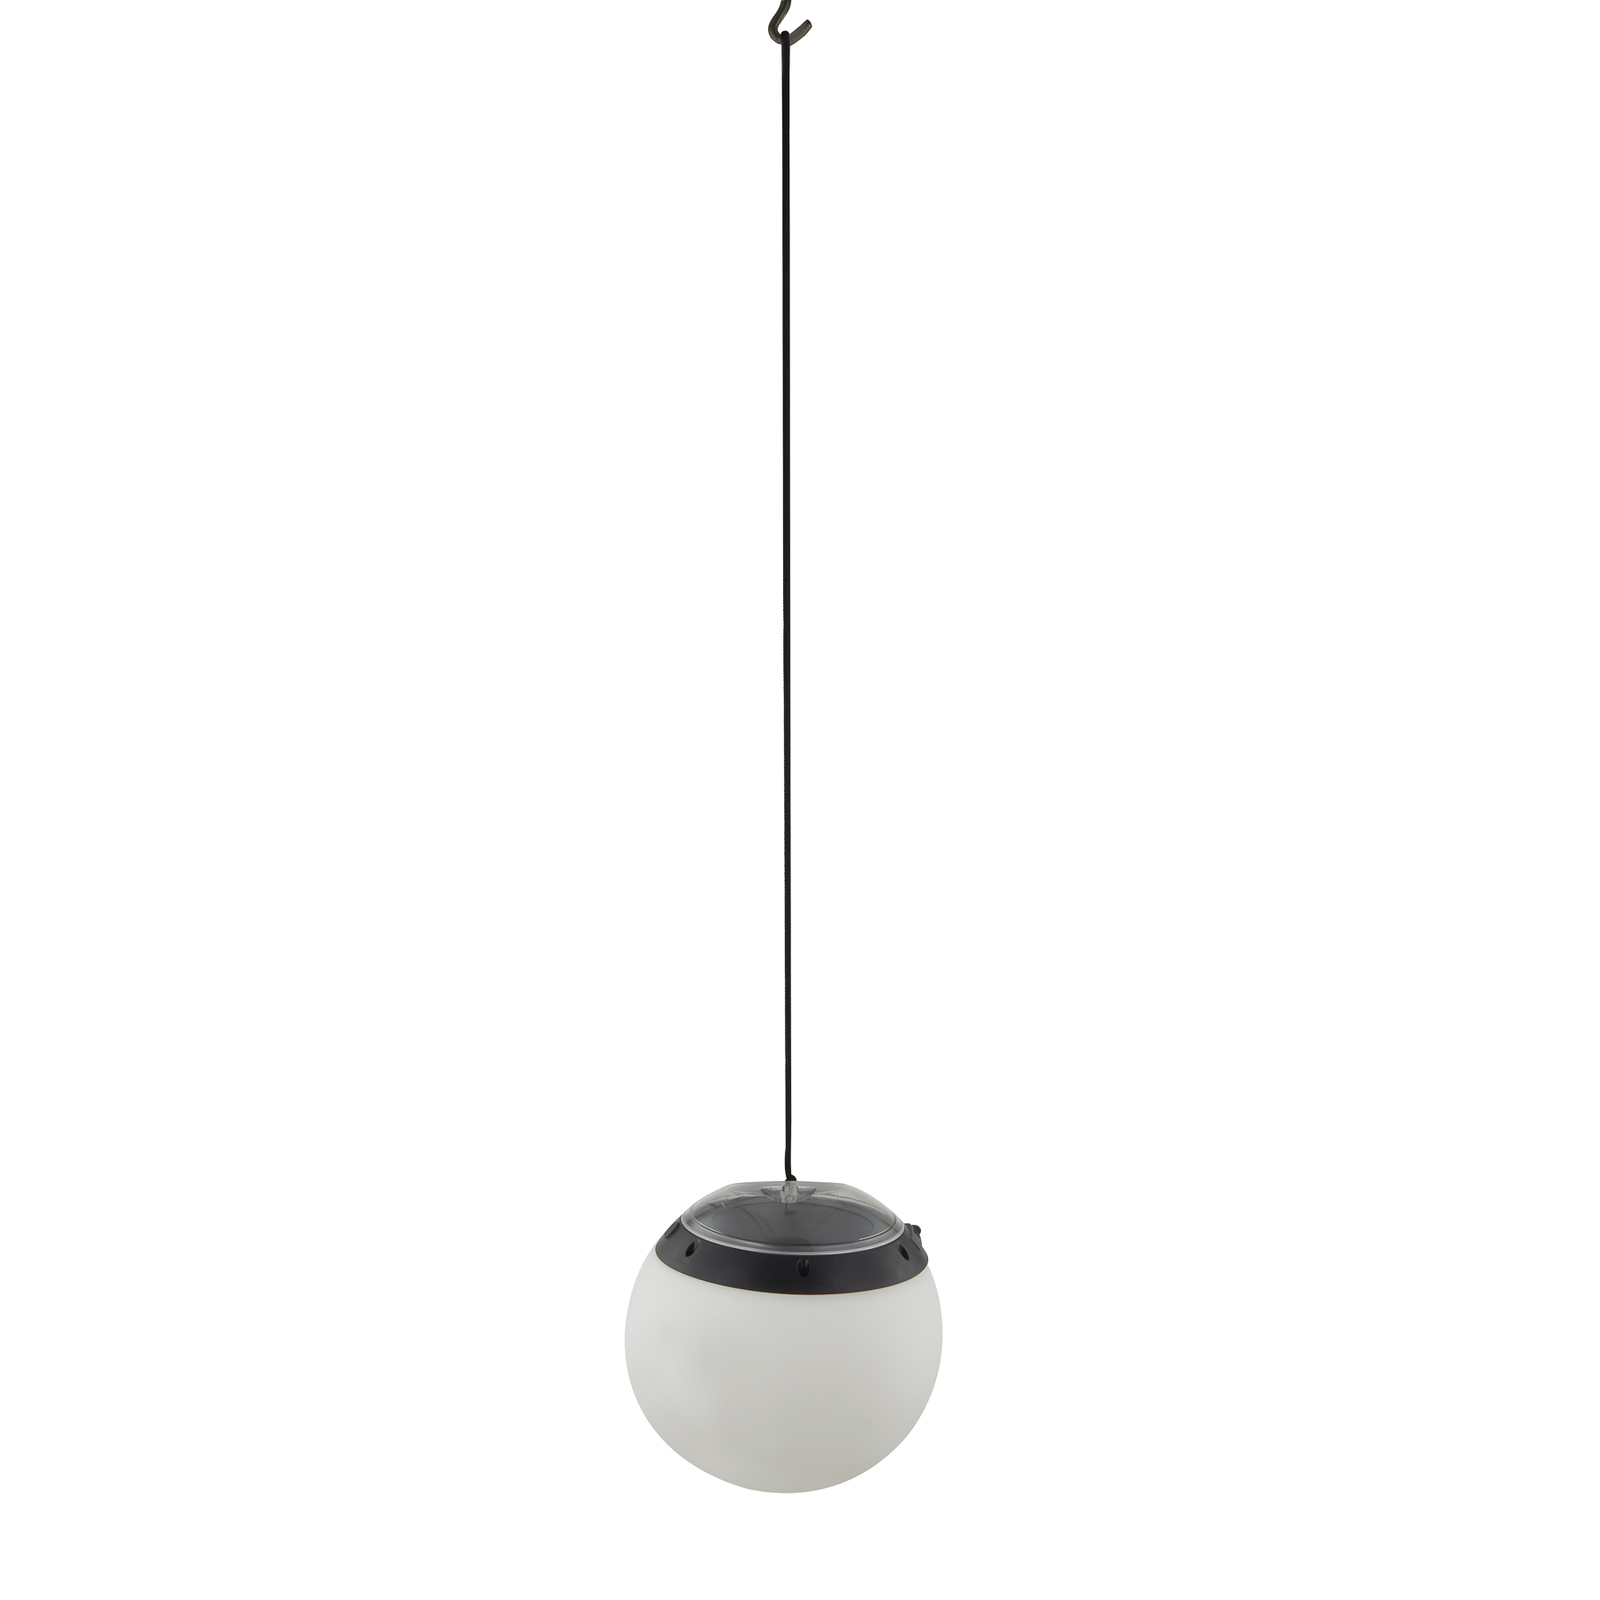 Lindby Eleia LED outdoor pendant light, rechargeable battery